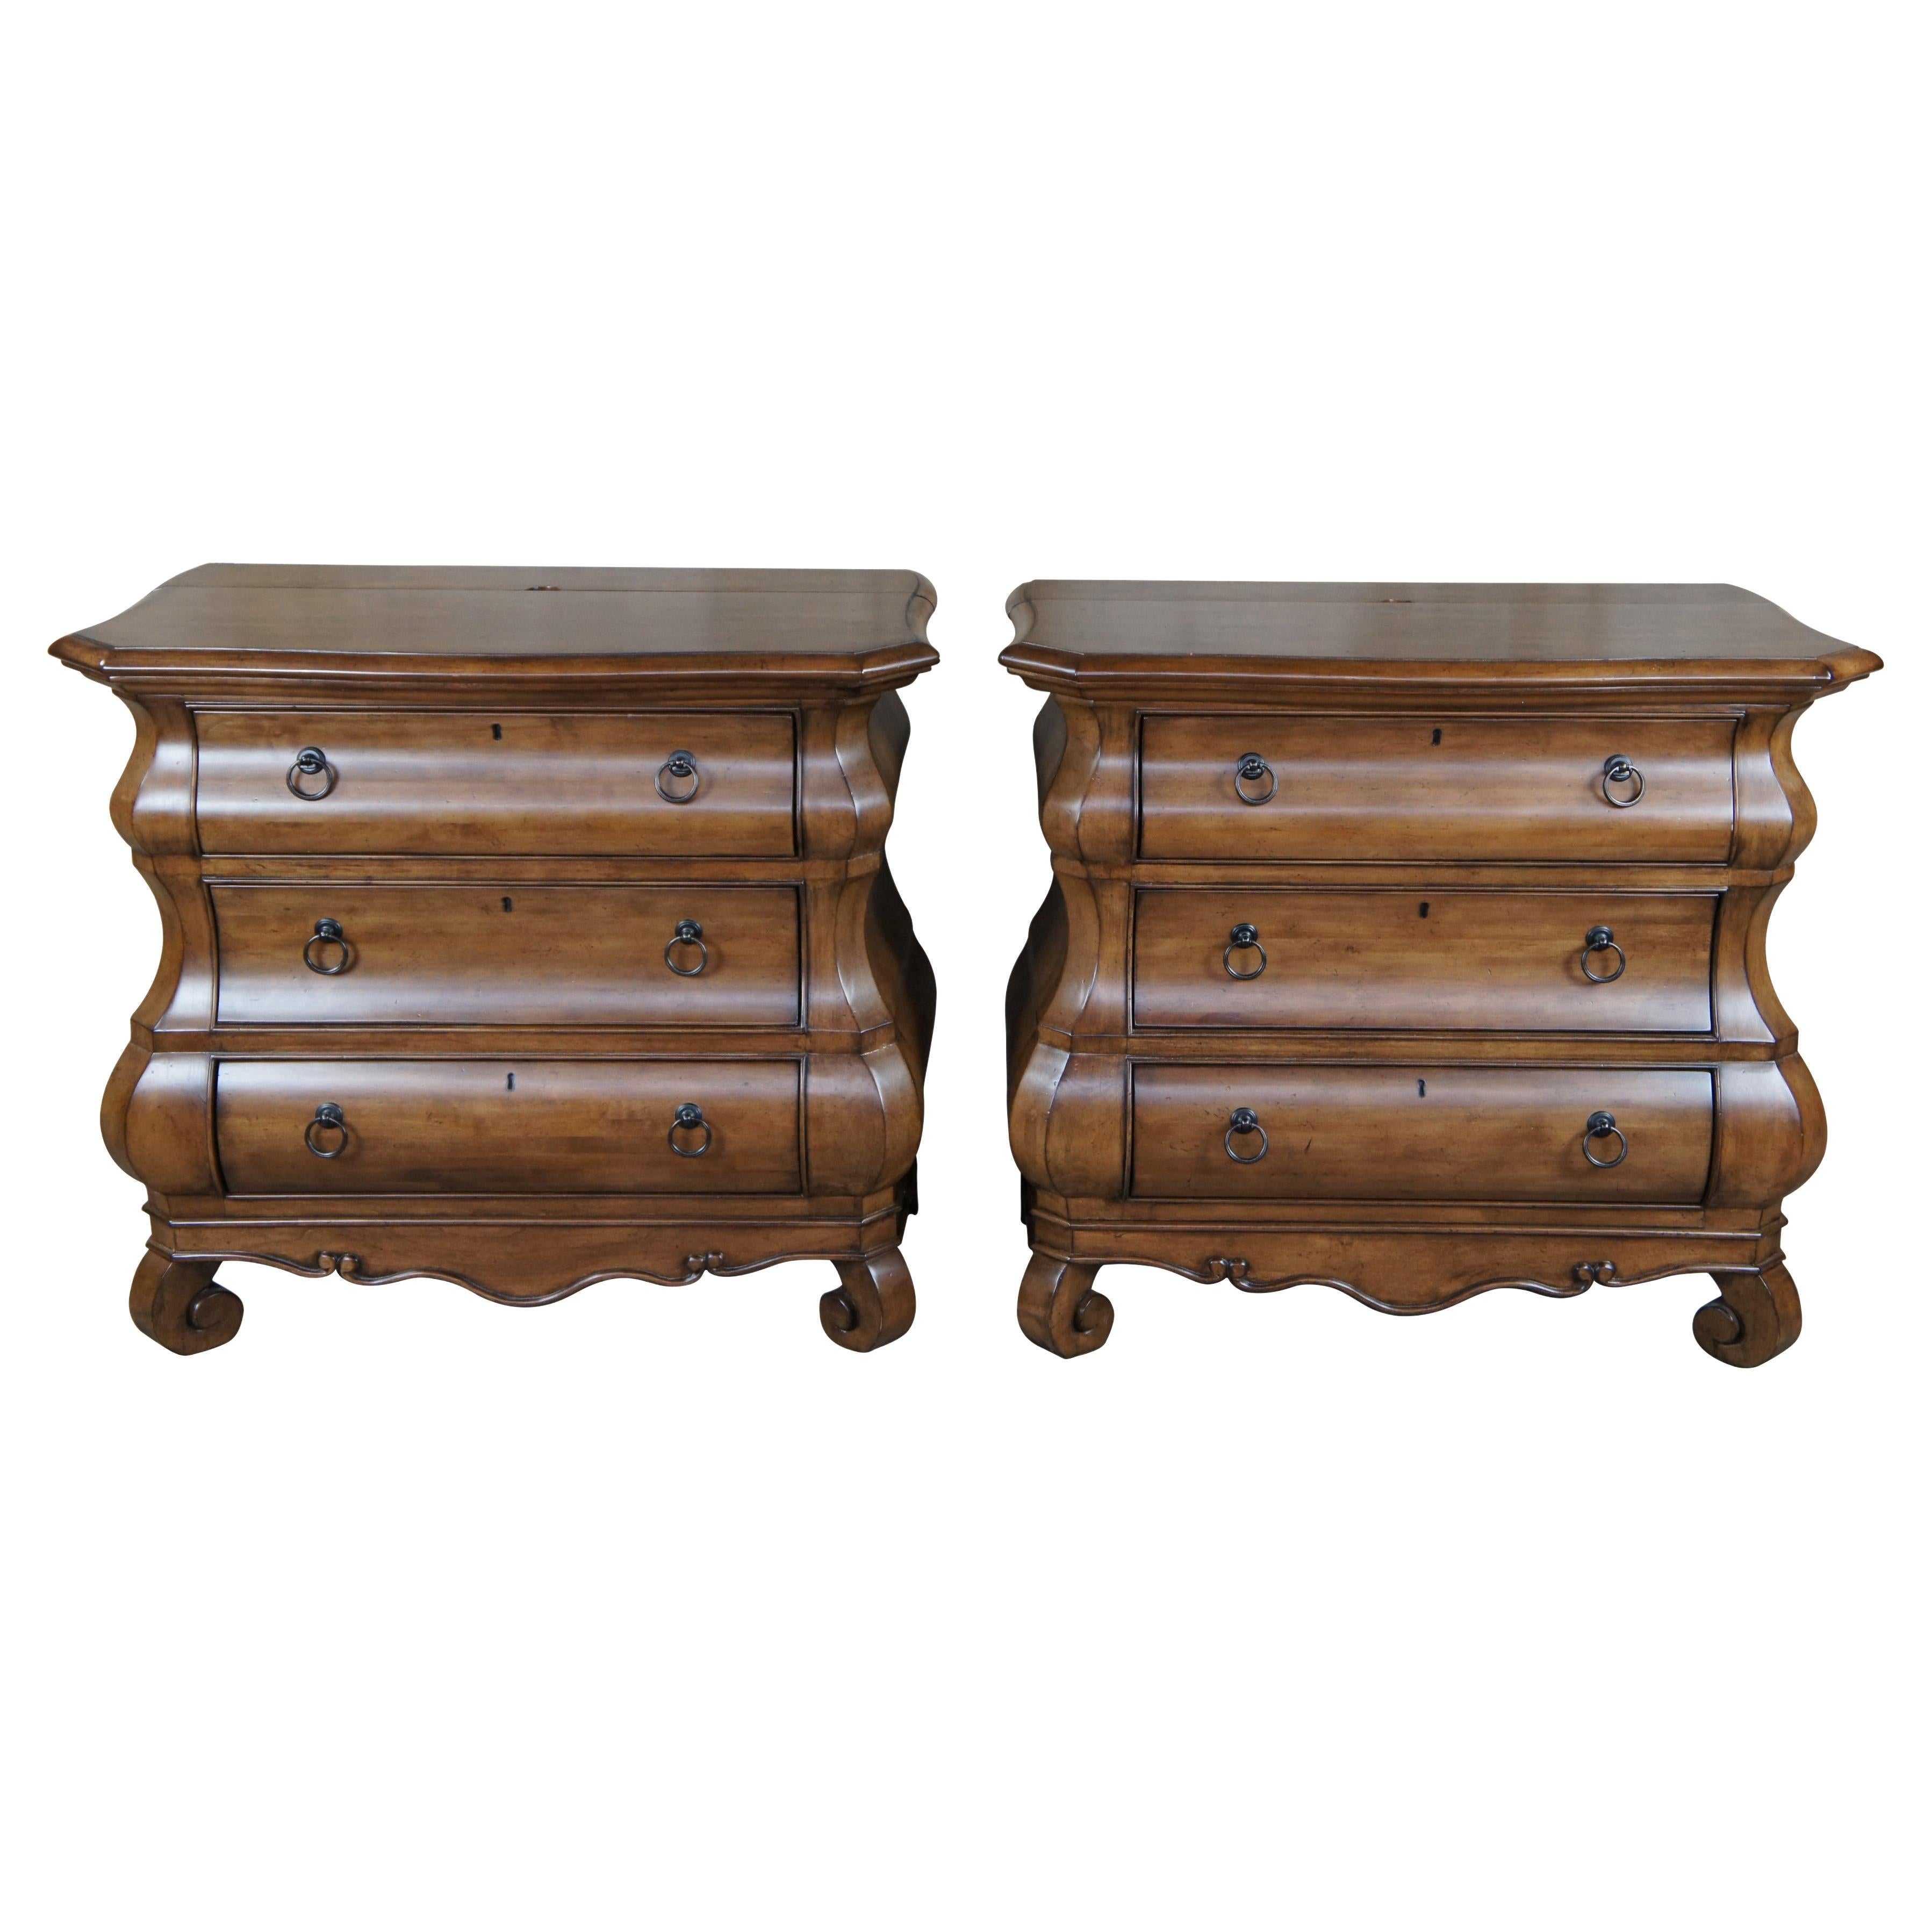 2 Pennsylvania House New Louie P's Chests Dutch Bombe Commode Dresser Nightstand